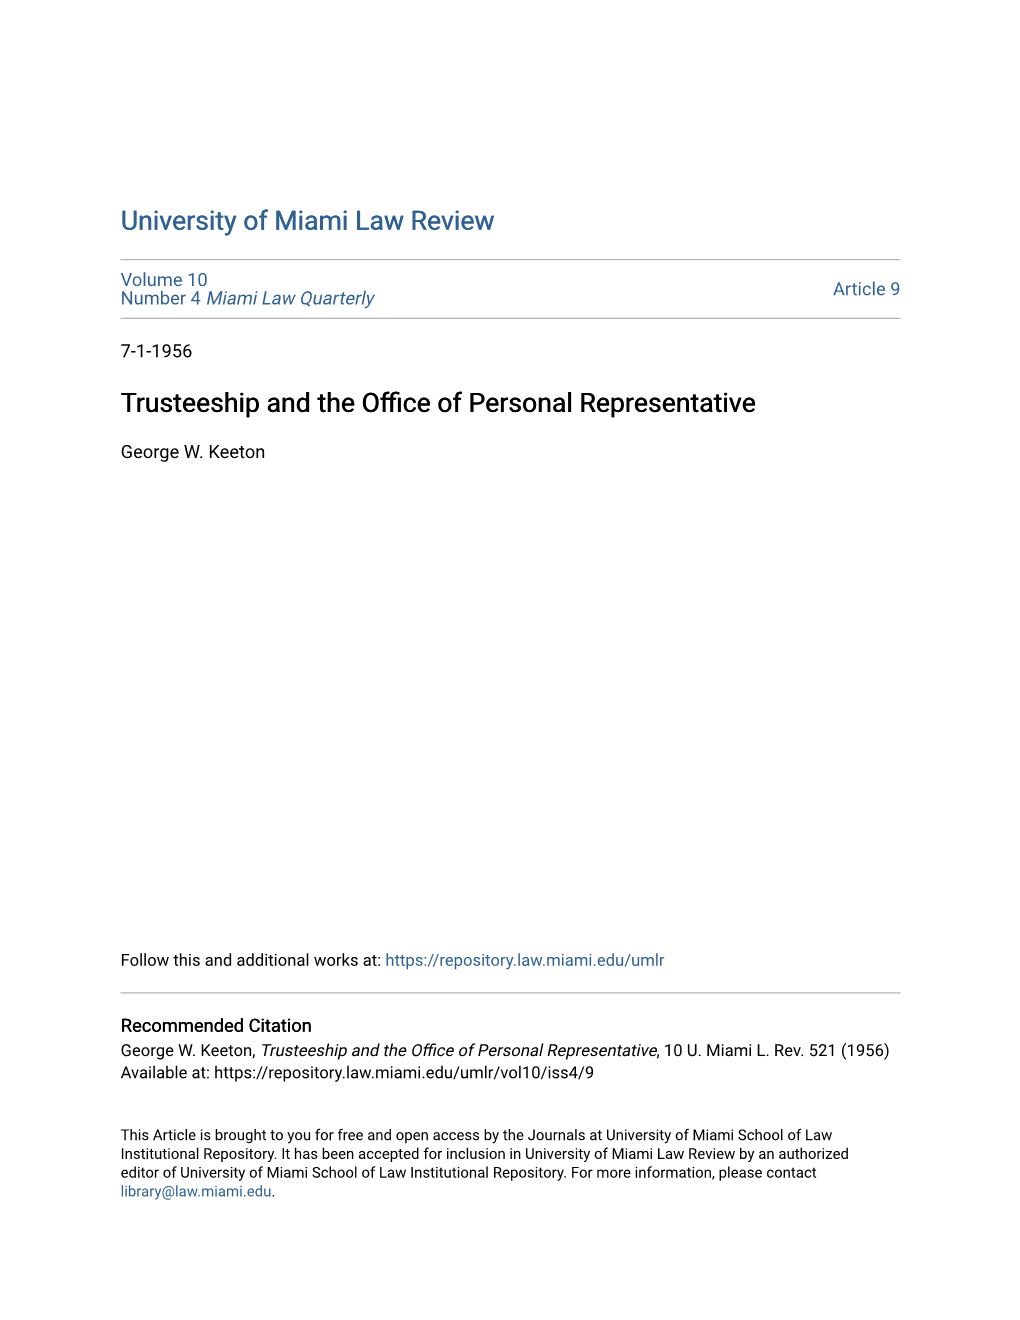 Trusteeship and the Office of Personal Representative George W